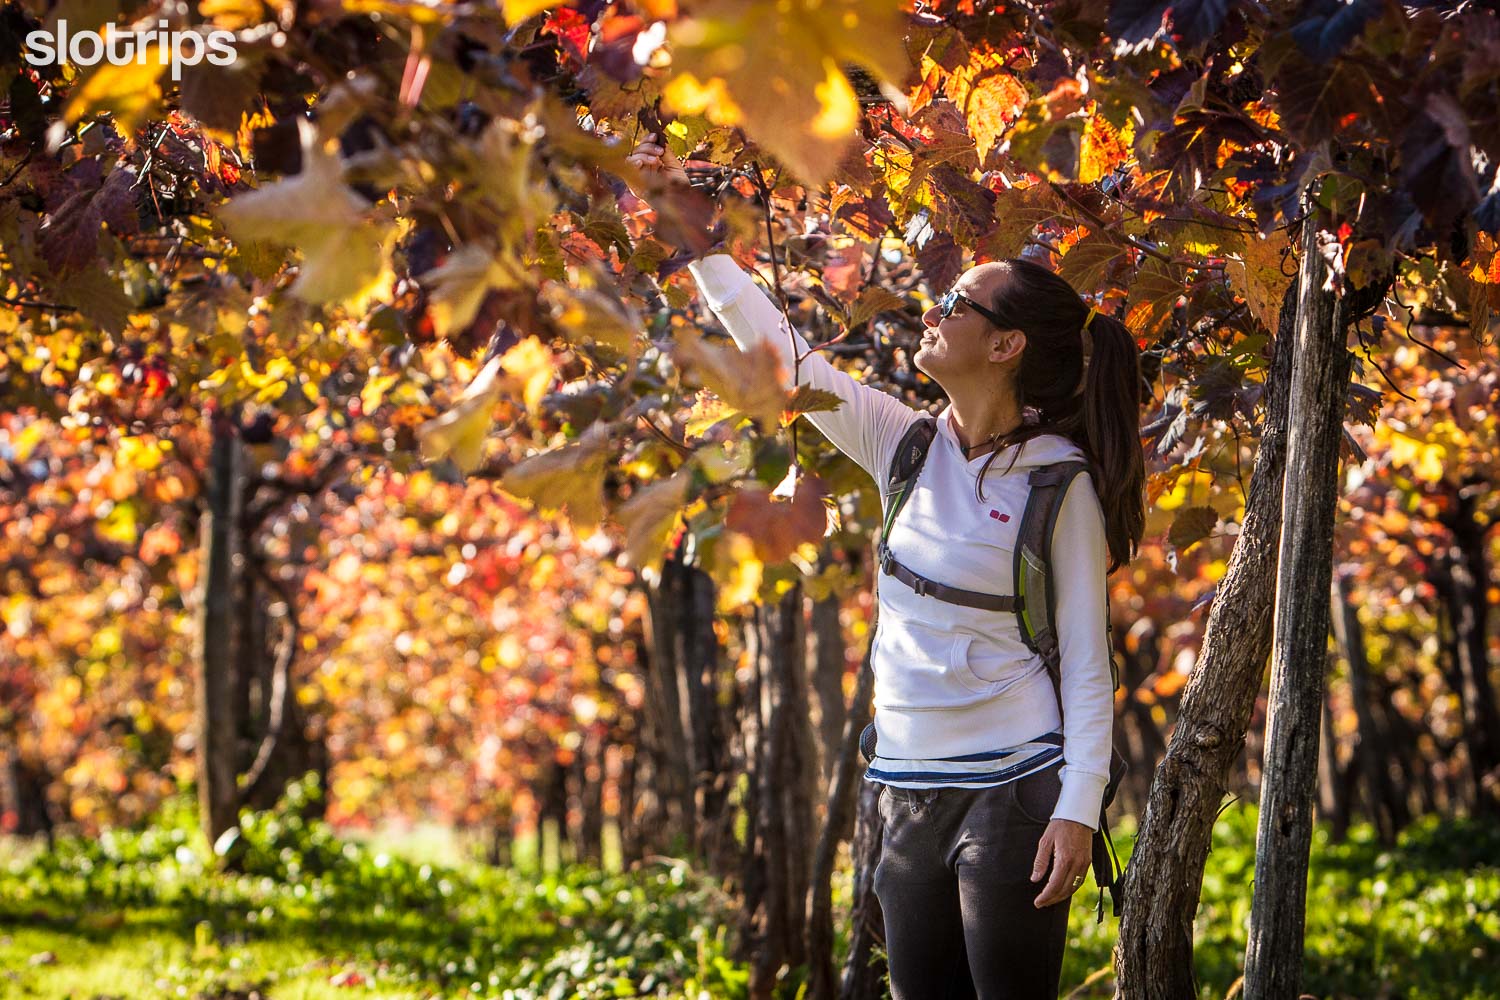 A hiker walking through a vineyard in warm autumn colors and trying some fresh grapes